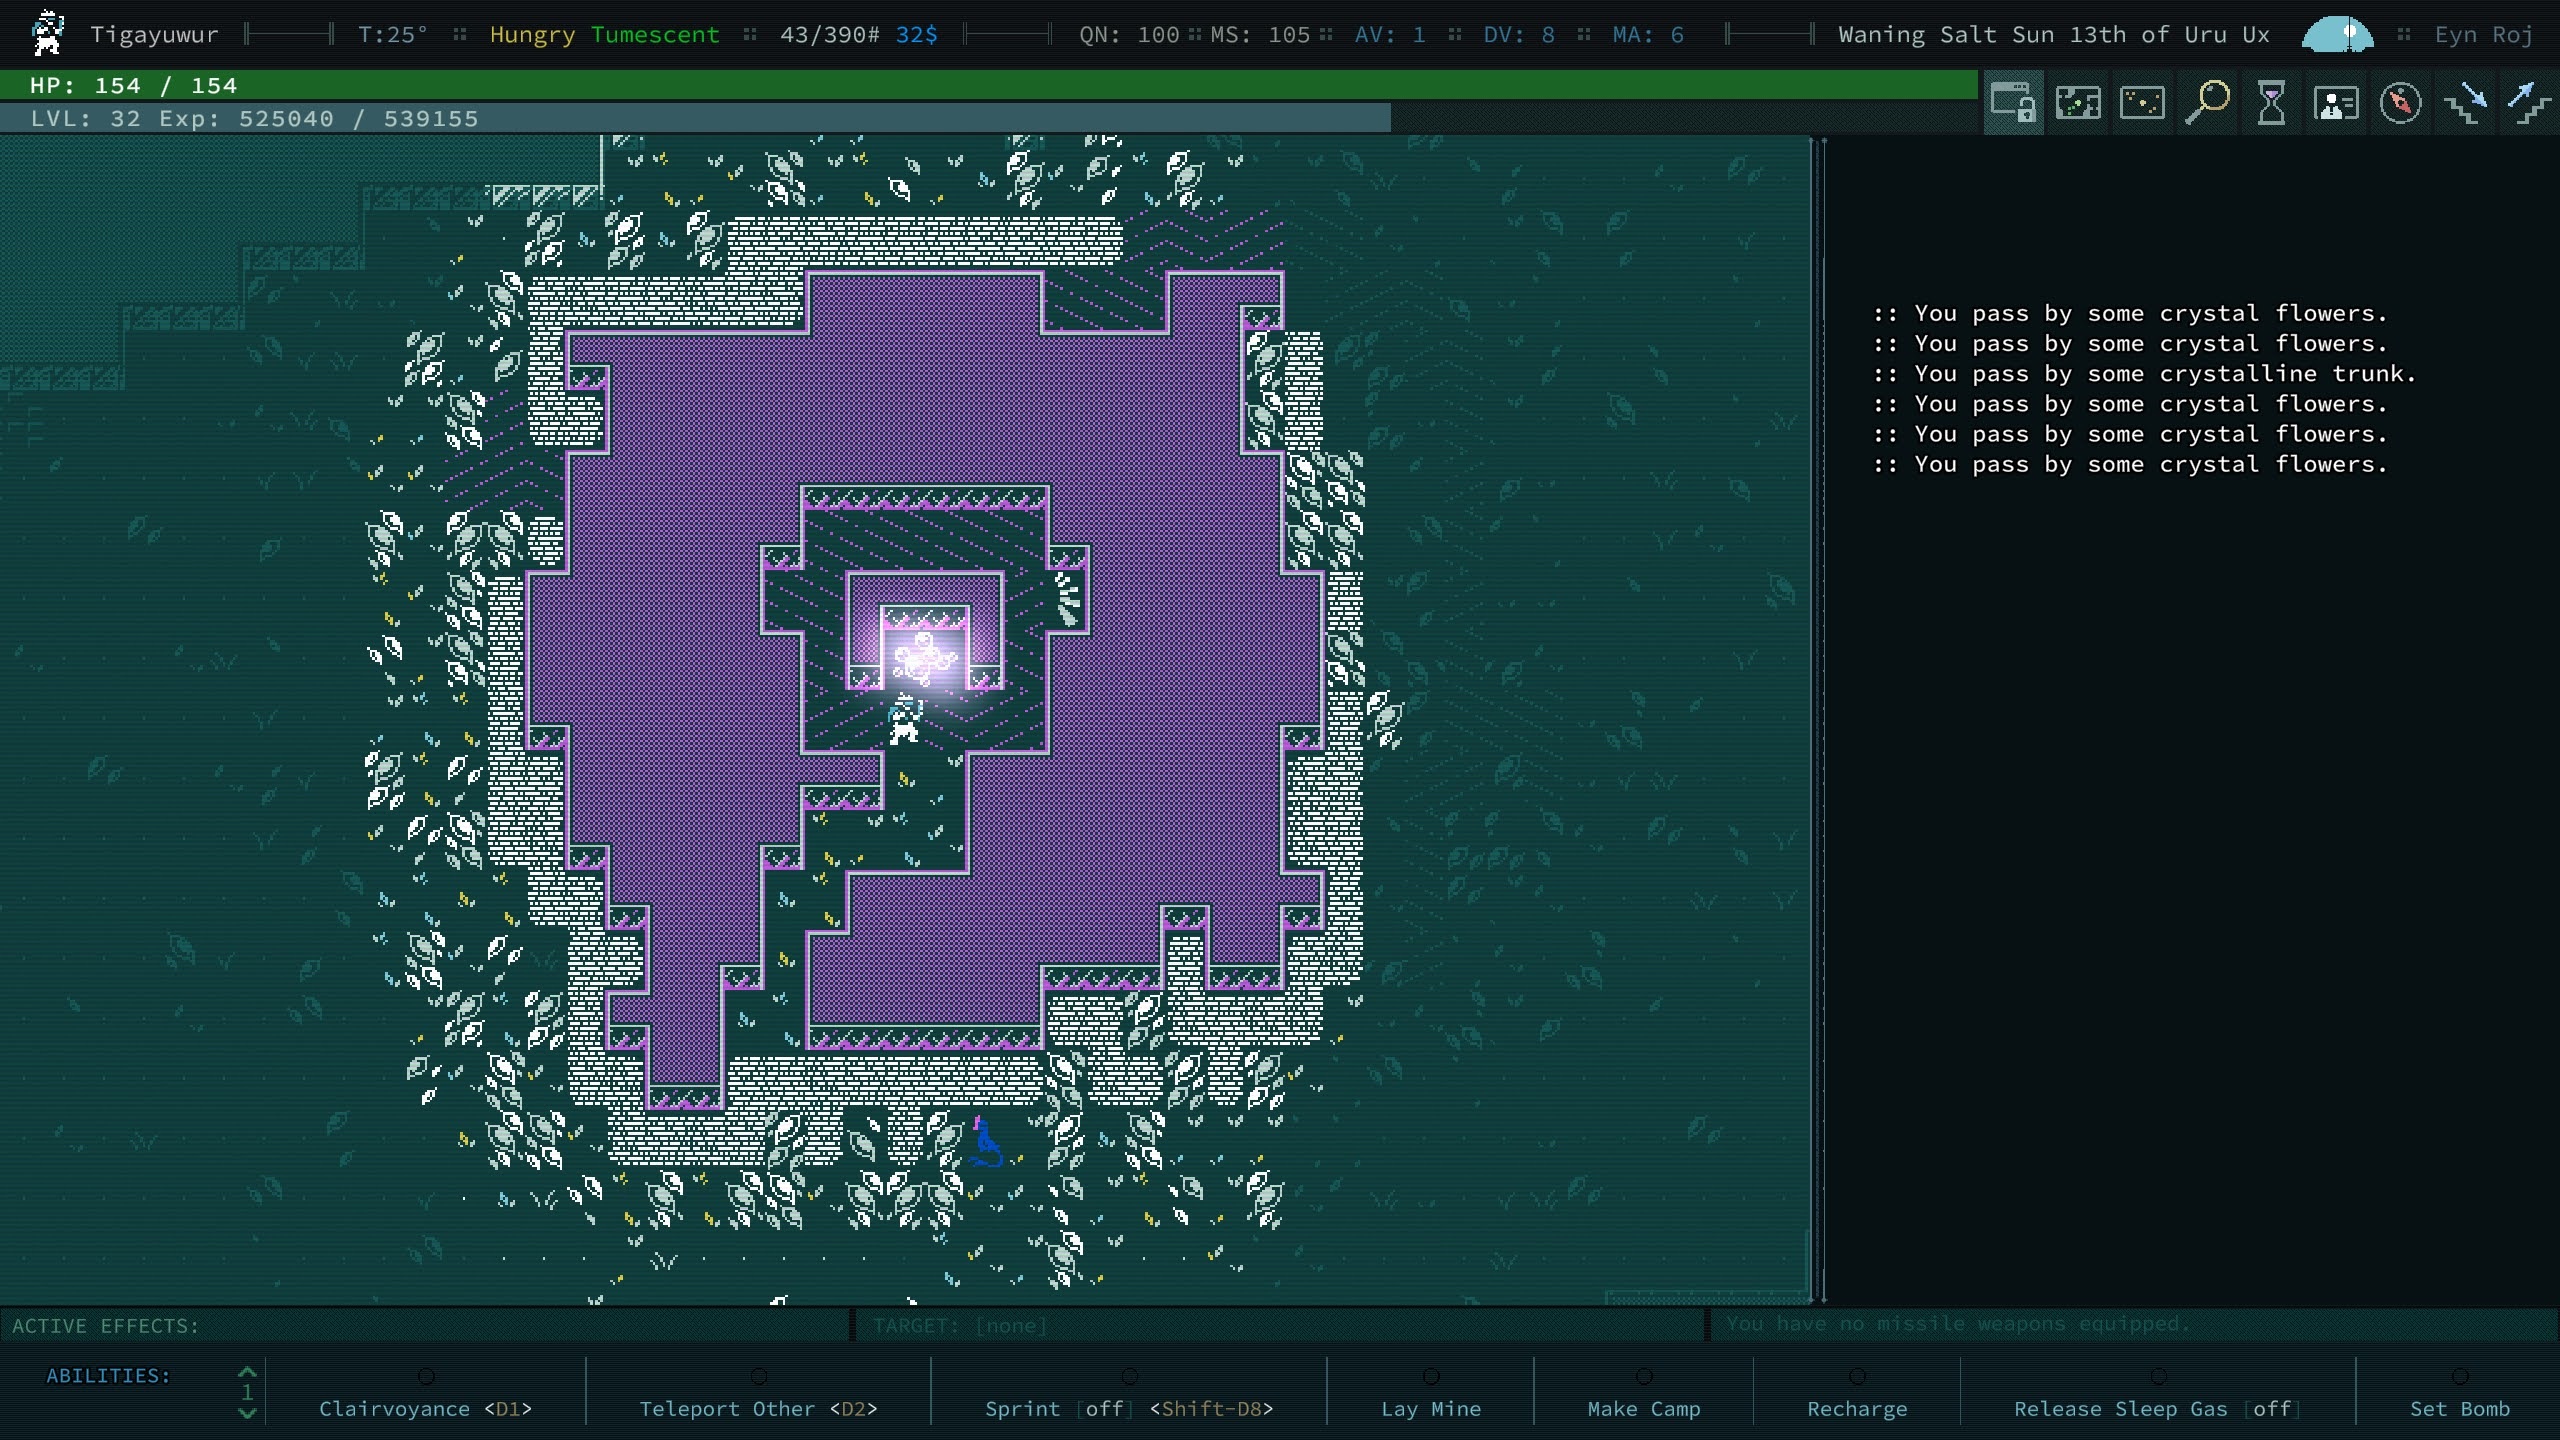 Climb some psychic crystals and get dreamcrungled in the latest Caves of Qud release